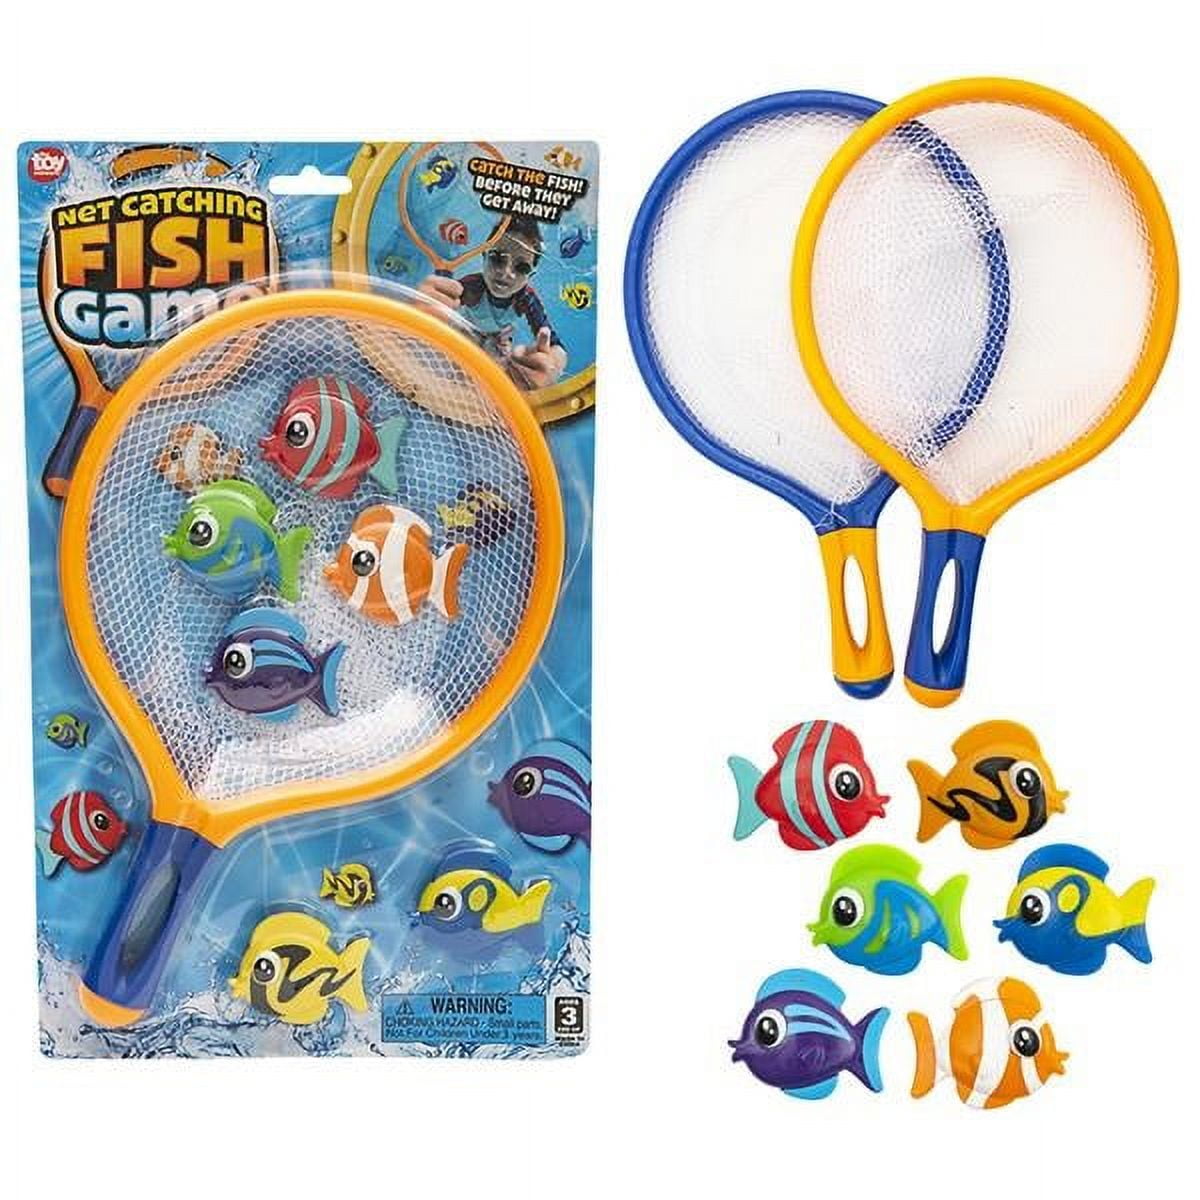 Fishing Net Catch Game, Set of 2, Each Set with 1 Fishing Net and 6  Colorful Fish Toys, Pool Toys for Kids, Bathtub Toys for Boys and Girls,  Summer Toys and Great